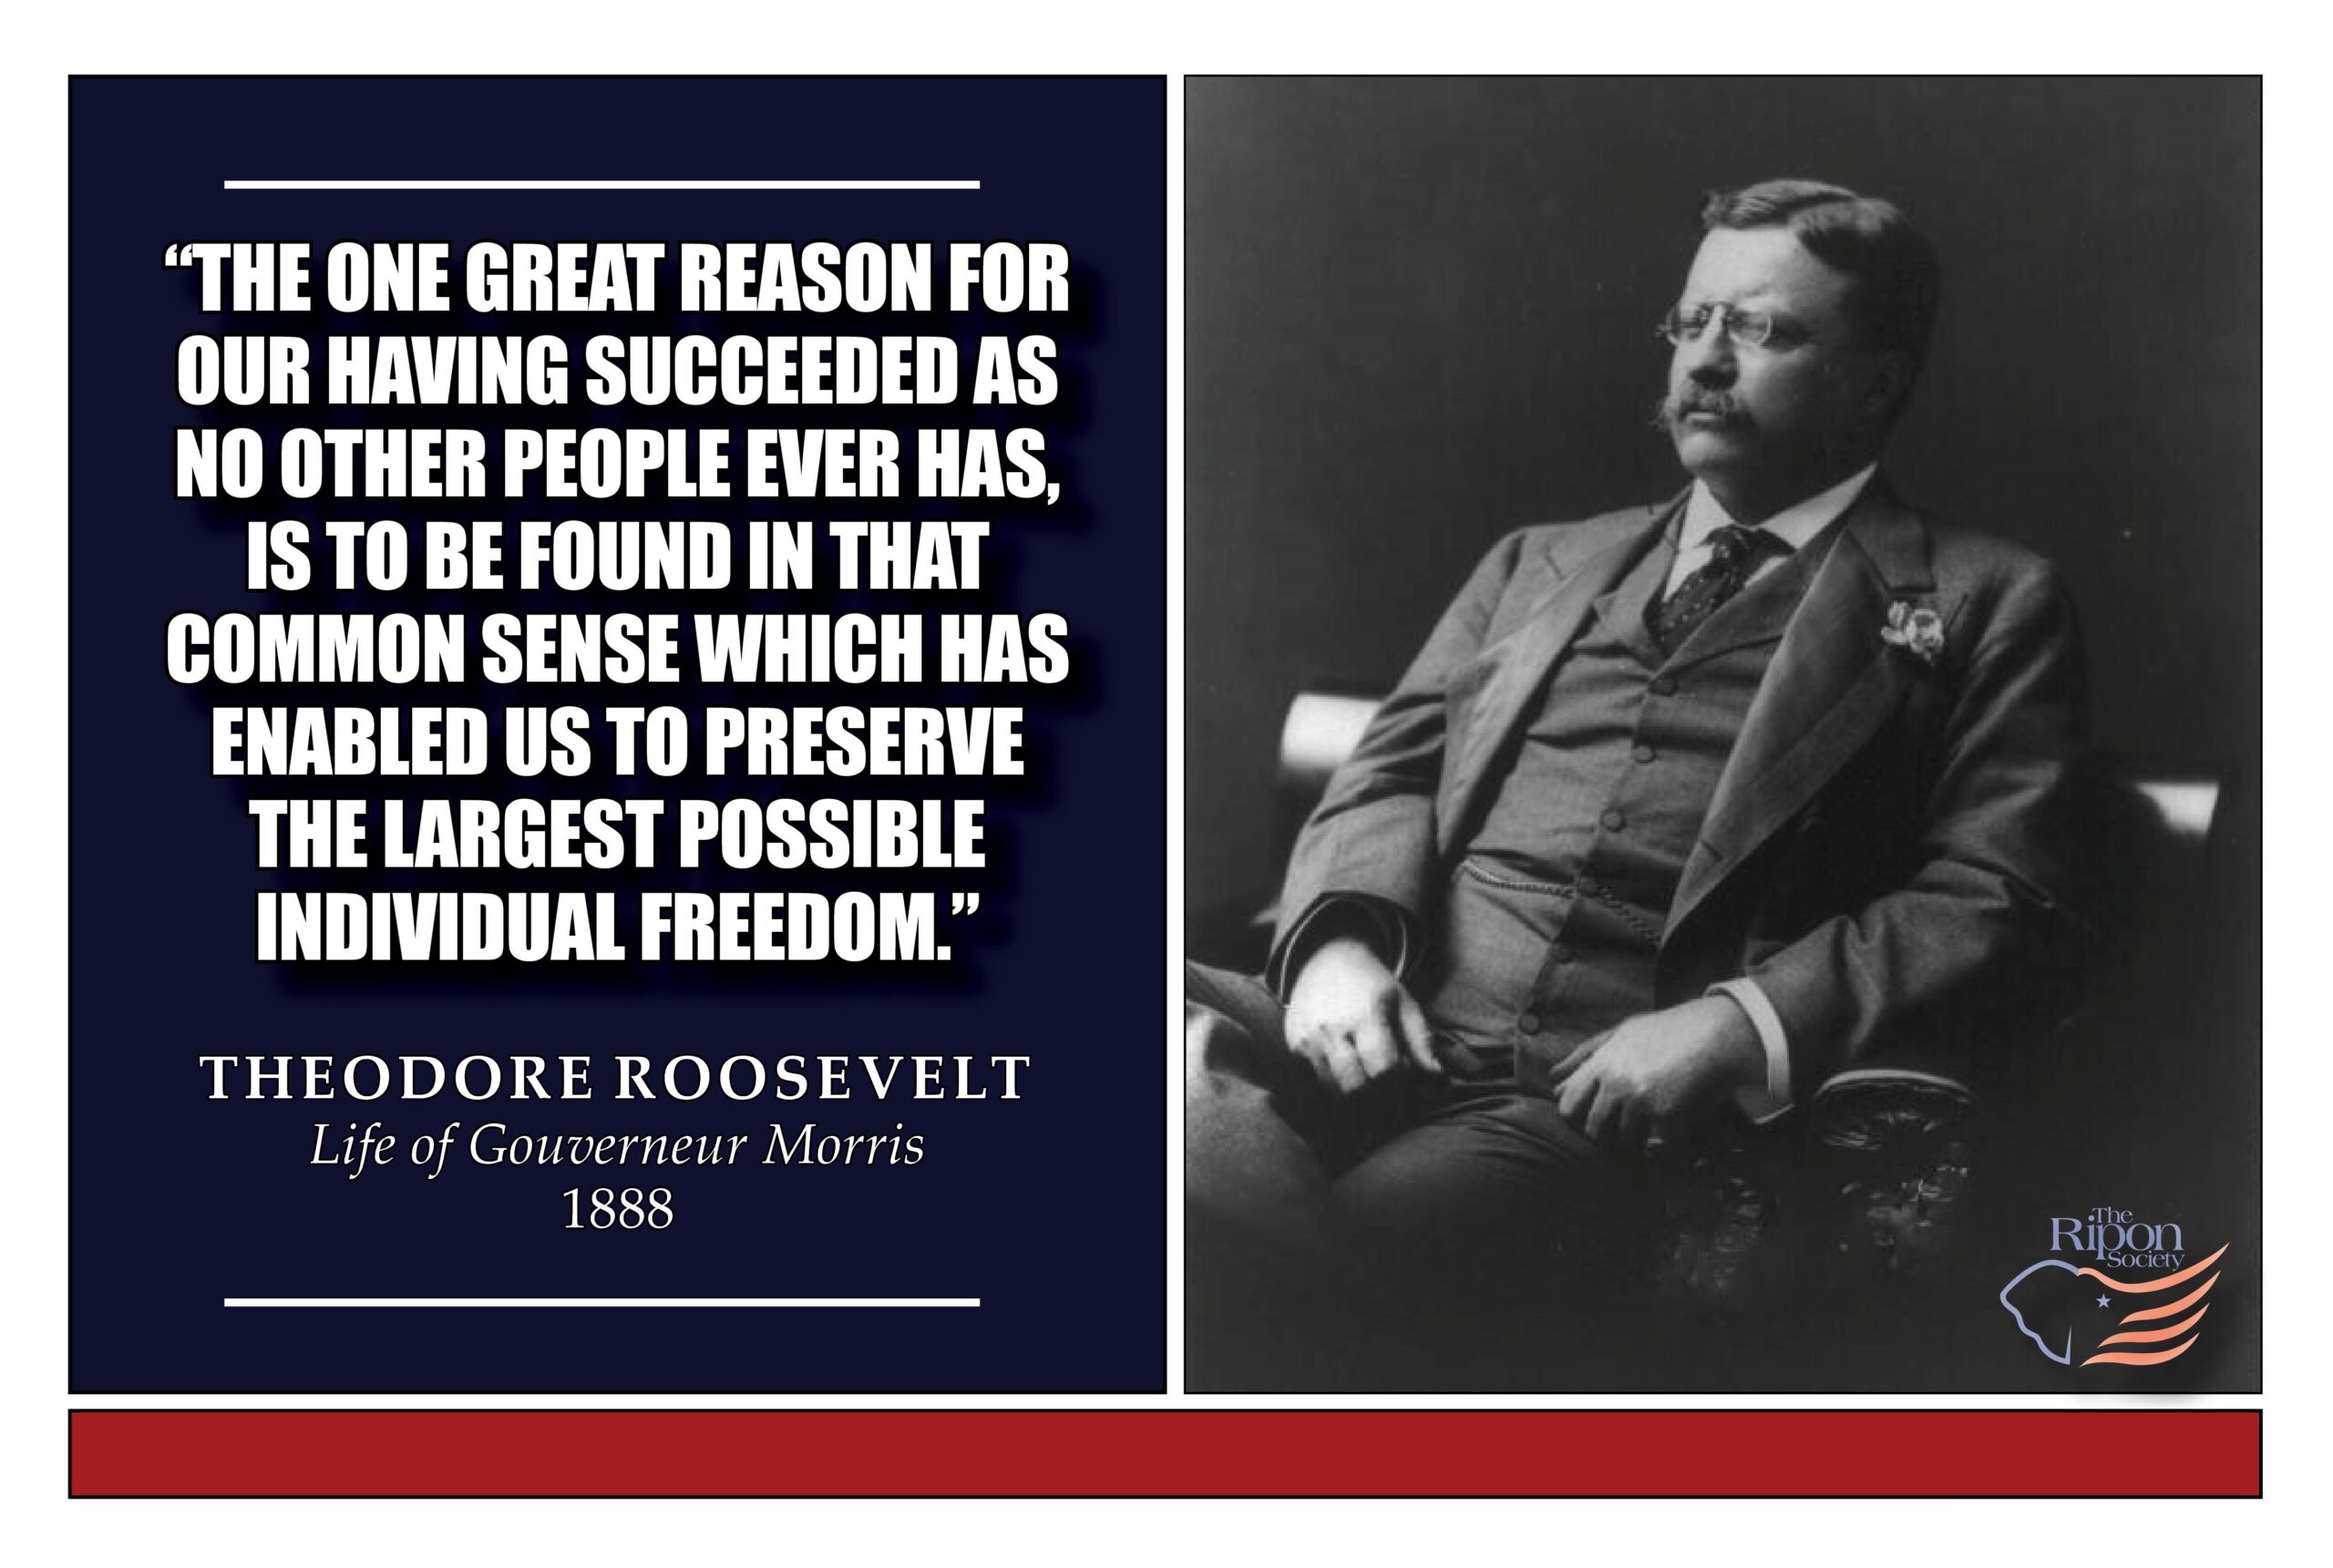 “The one great reason for our having succeeded as no other people ever has, is to be found in that common sense which has enabled us to preserve the largest possible individual freedom.”

Life of Gouverneur Morris, 1888 